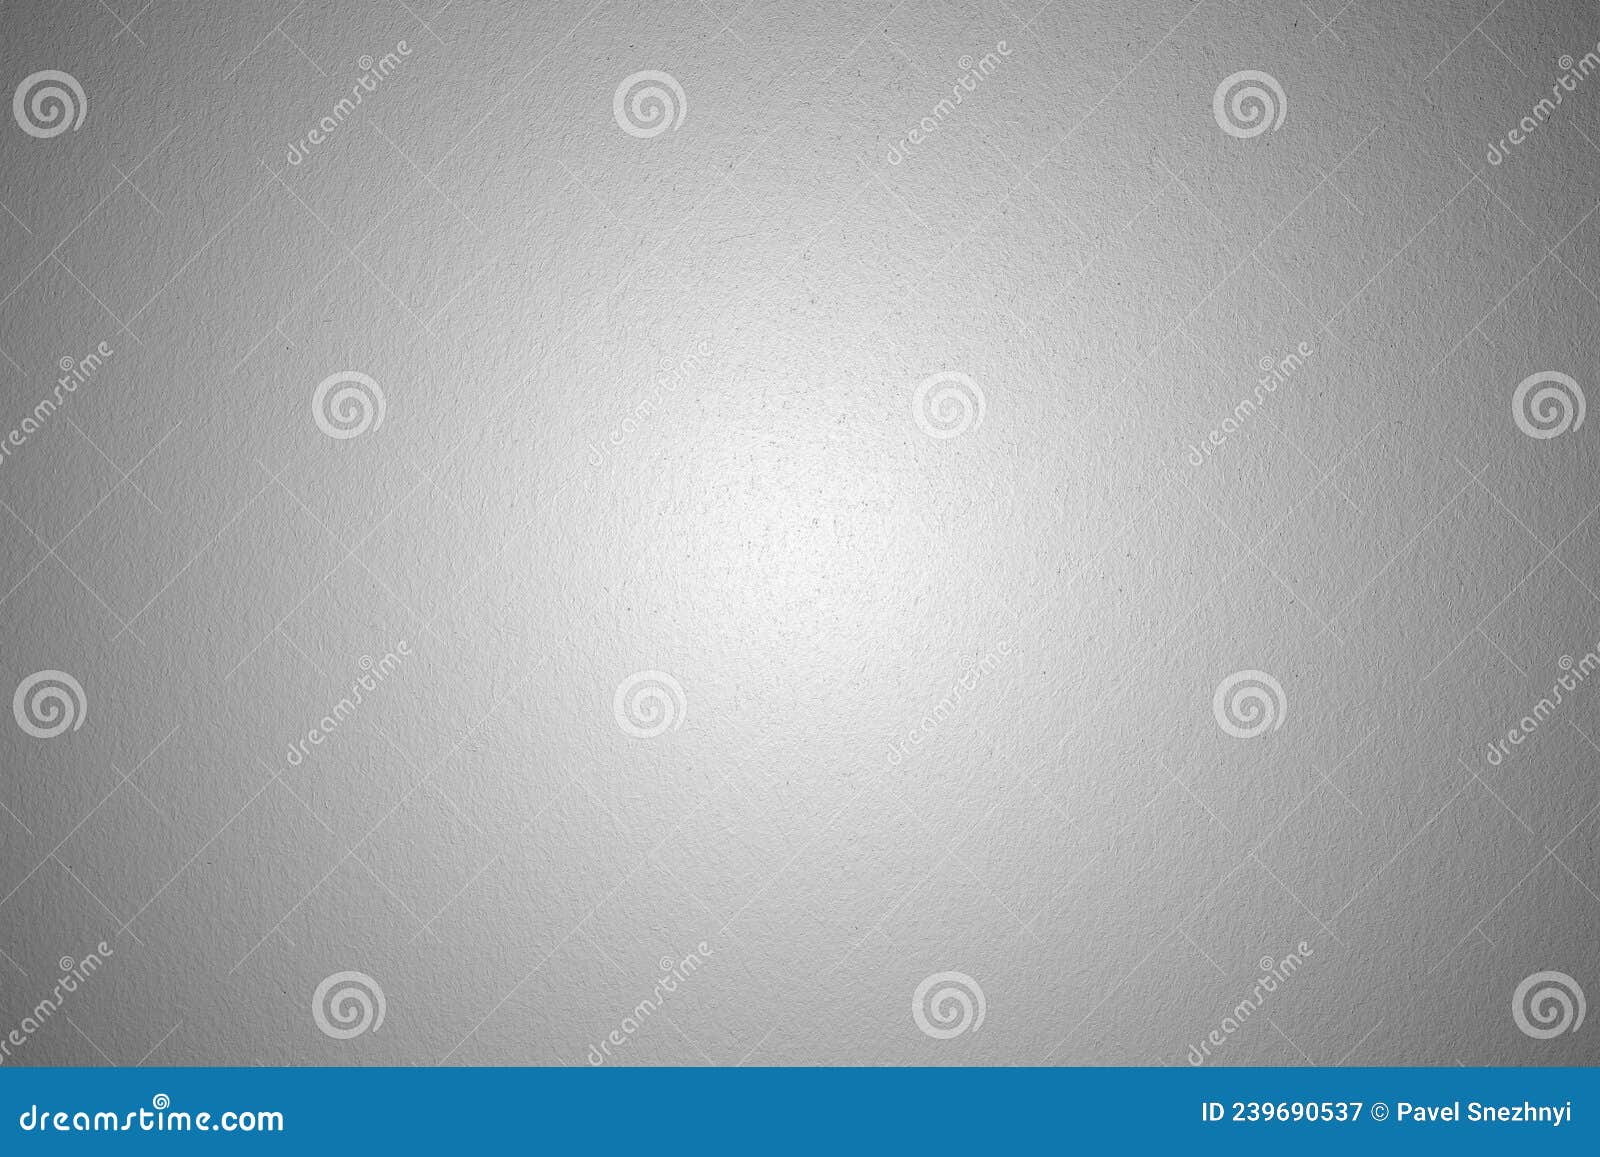 Abstract Gray Relief Texture with Light Center for Design Stock Image ...